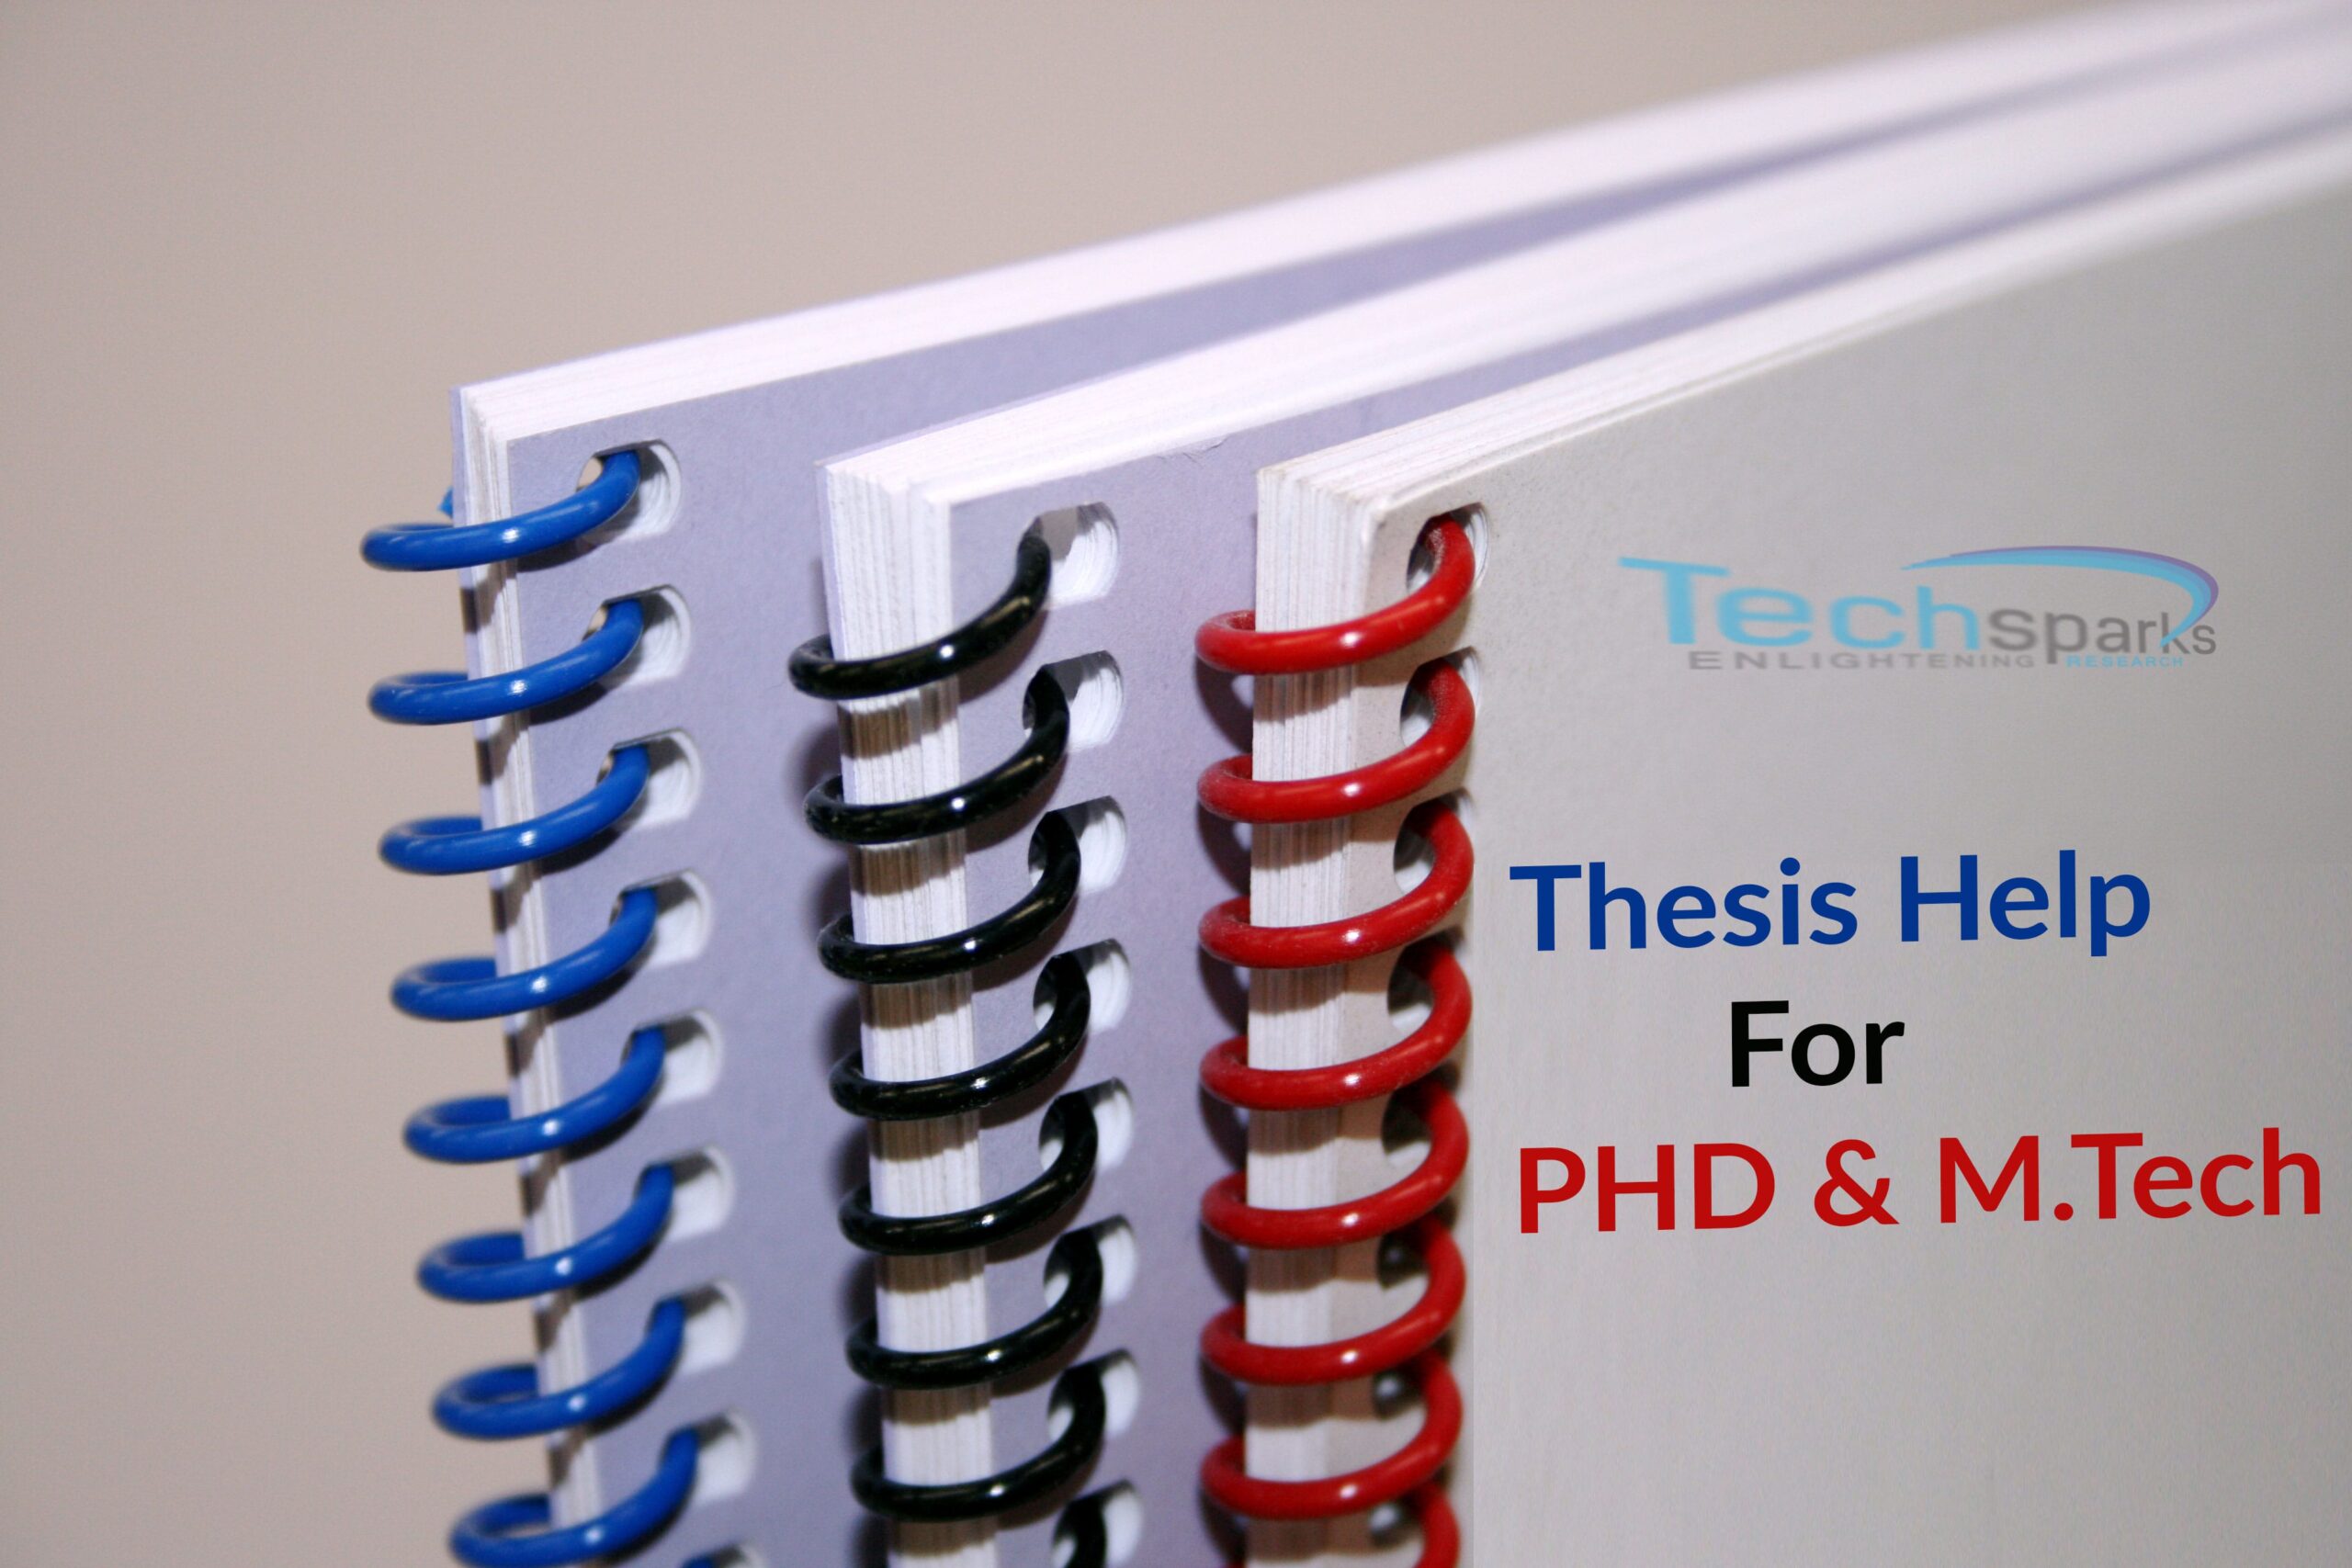 The Perfect Place to Buy Your M.tech Thesis